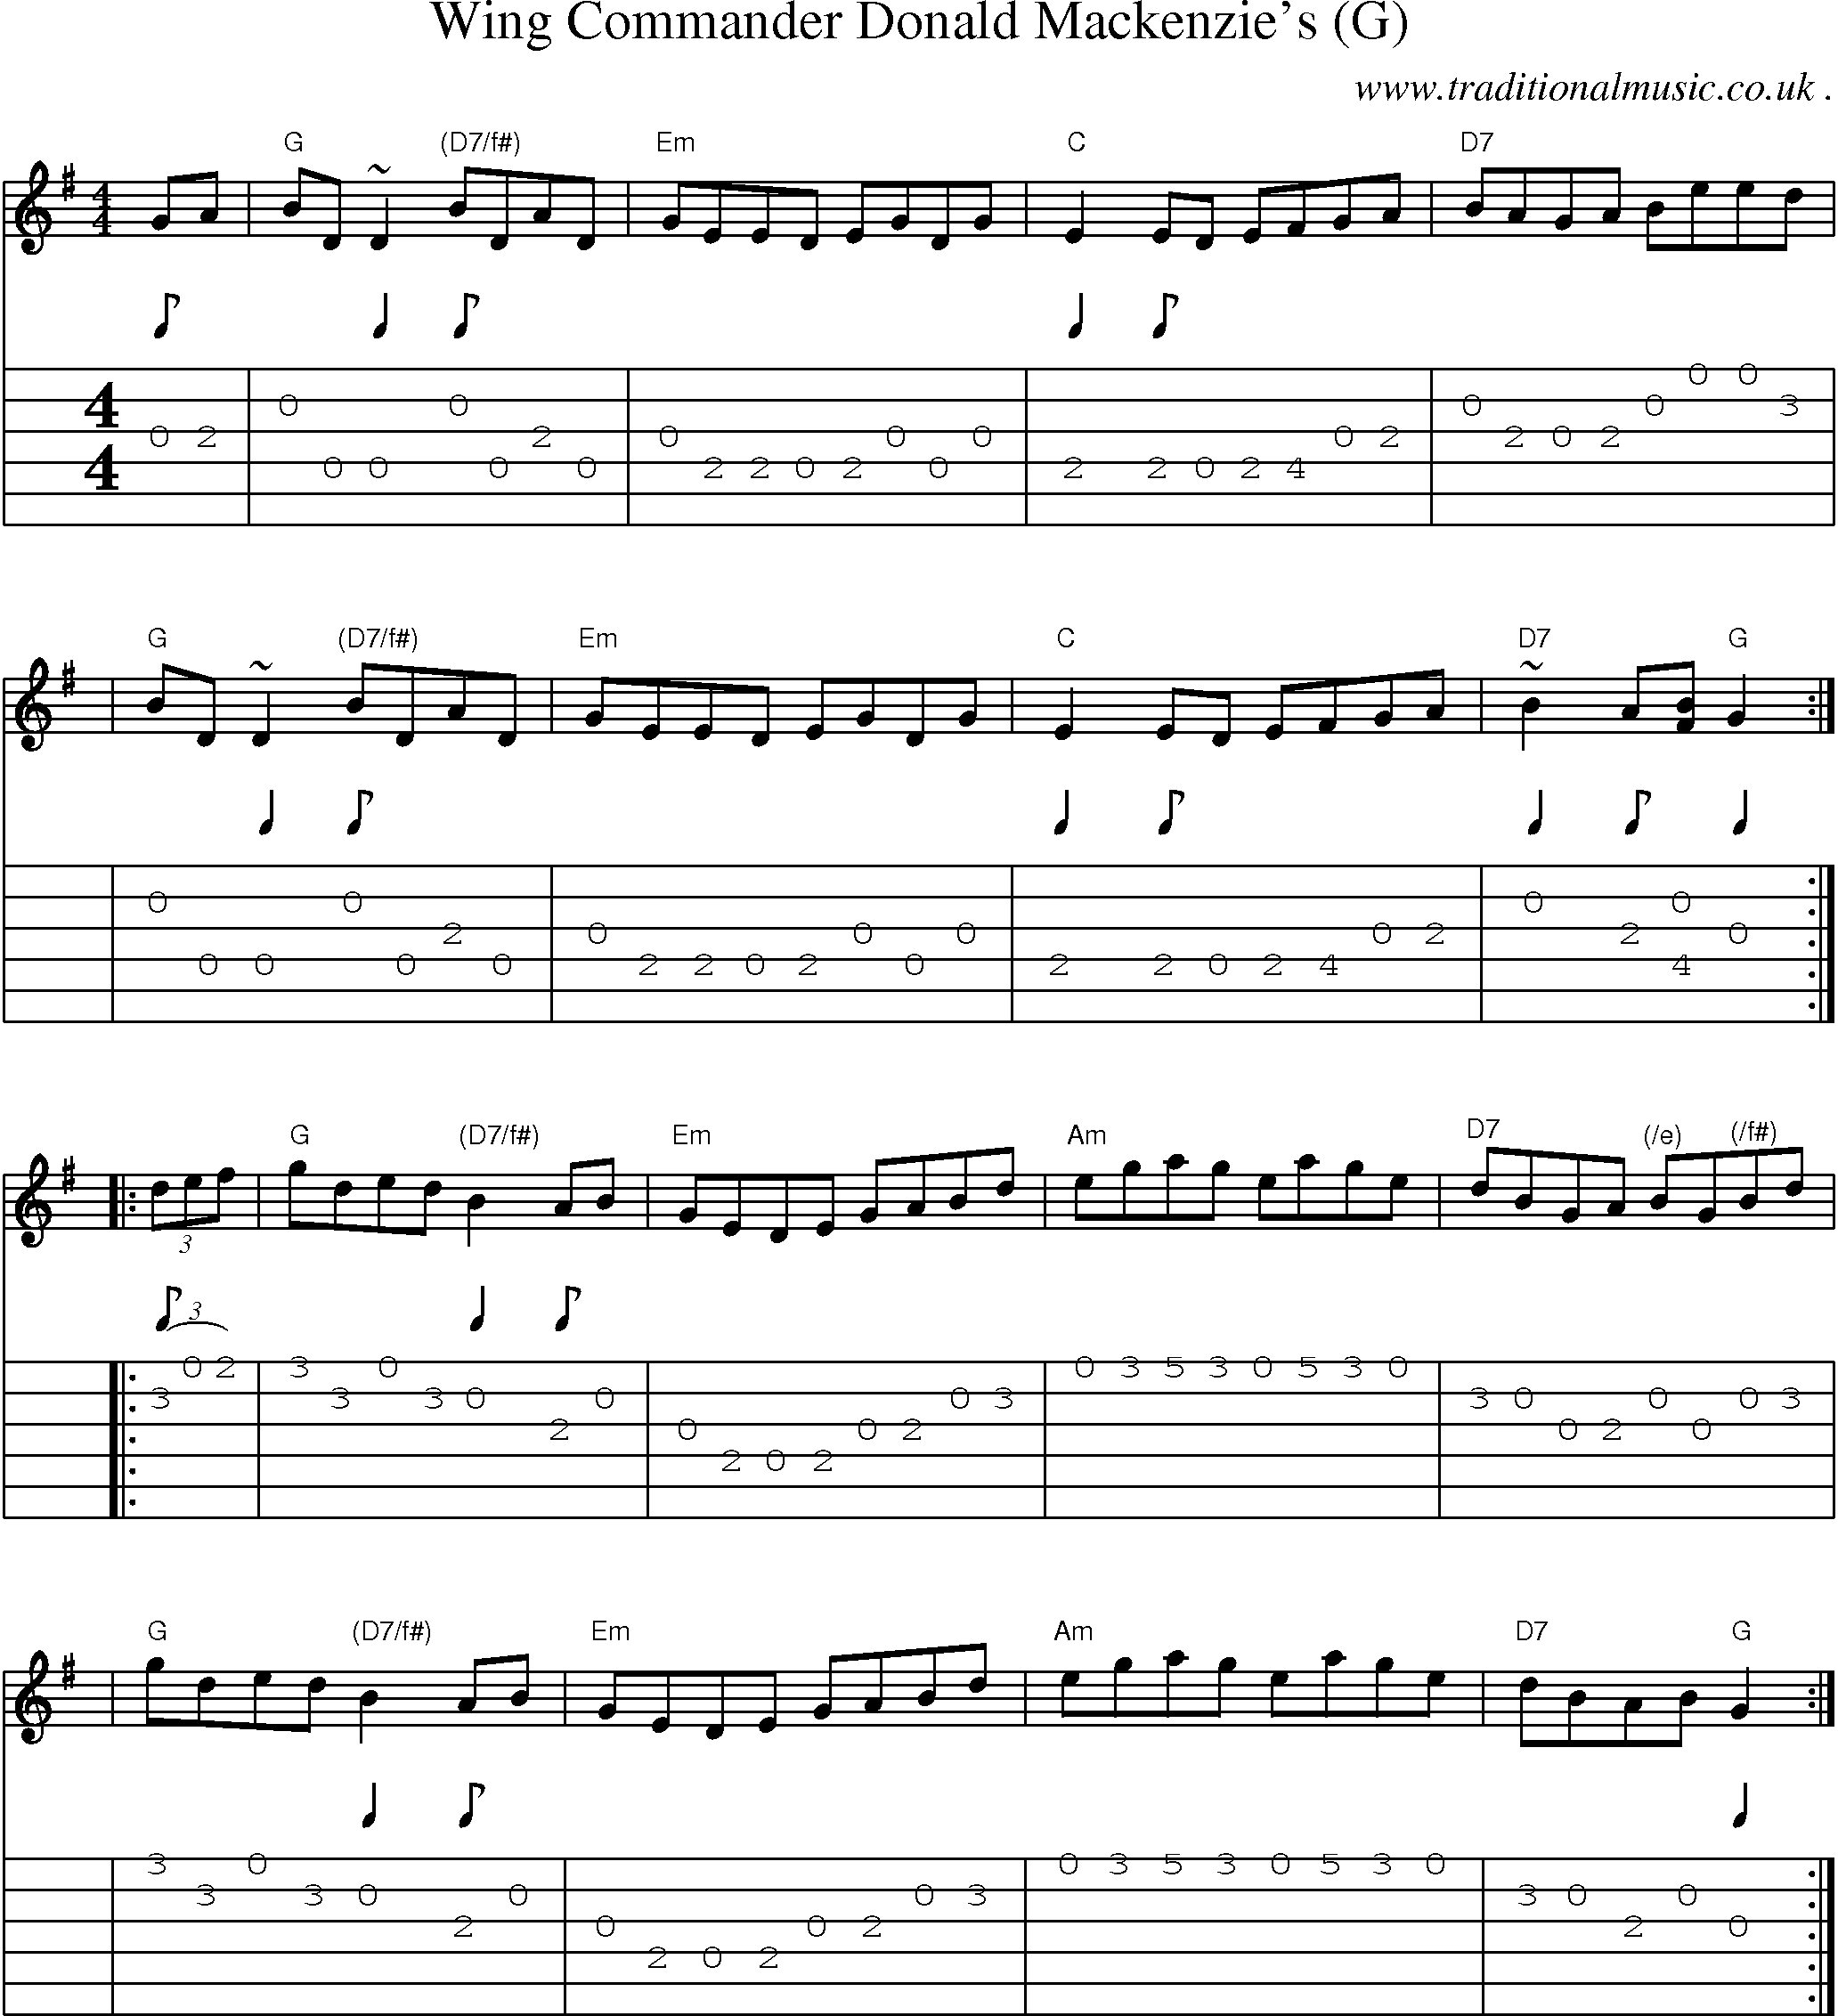 Sheet-music  score, Chords and Guitar Tabs for Wing Commander Donald Mackenzies G